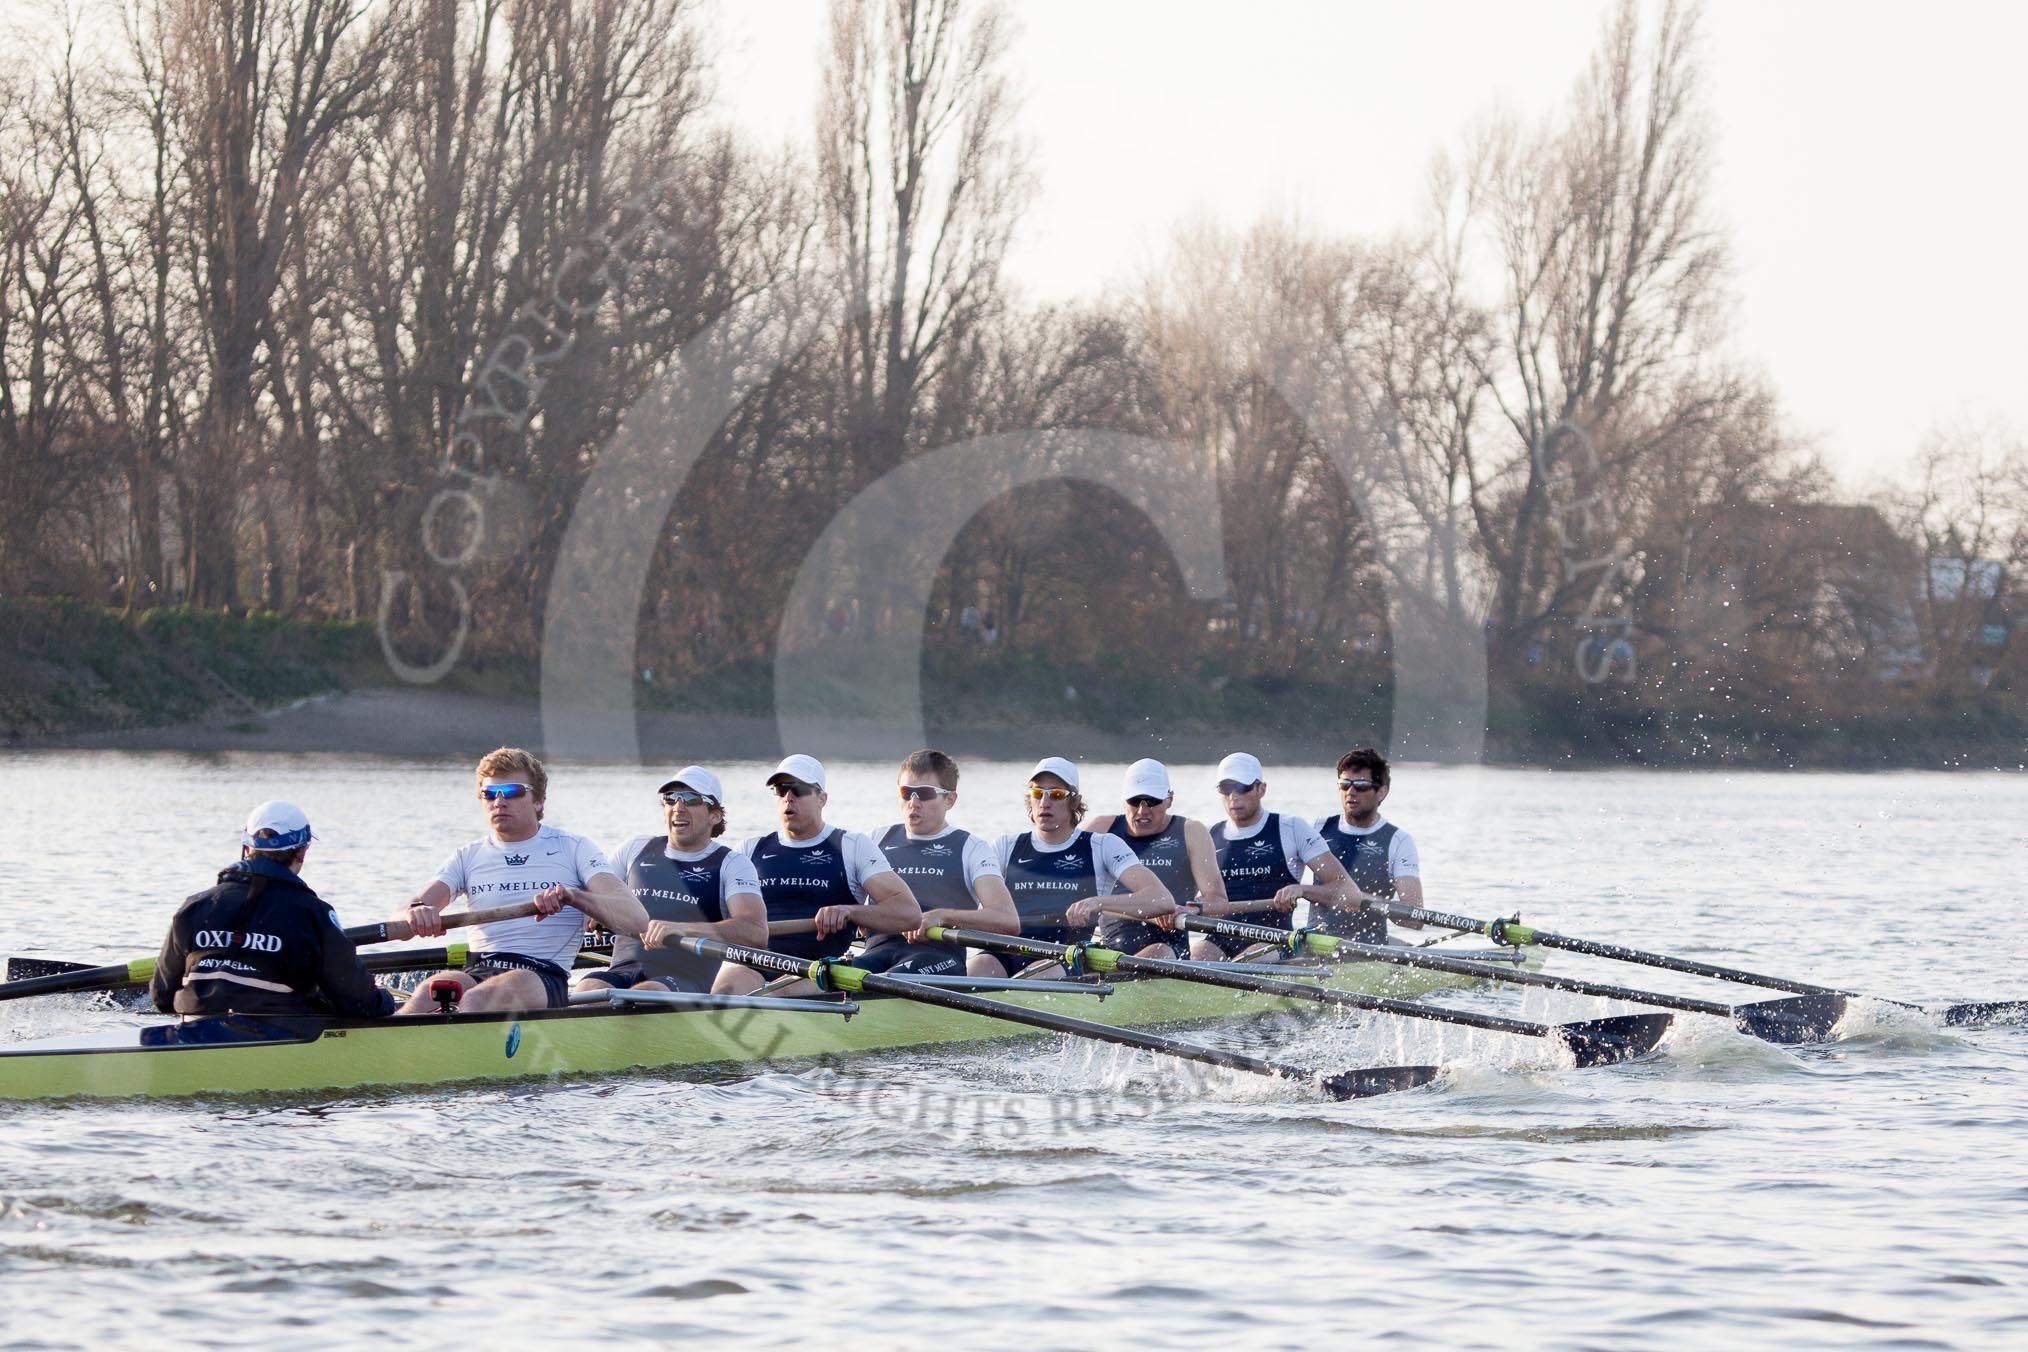 The Boat Race season 2014 - fixture OUBC vs German U23: The OUBC boat..
River Thames between Putney Bridge and Chiswick Bridge,



on 08 March 2014 at 16:47, image #61